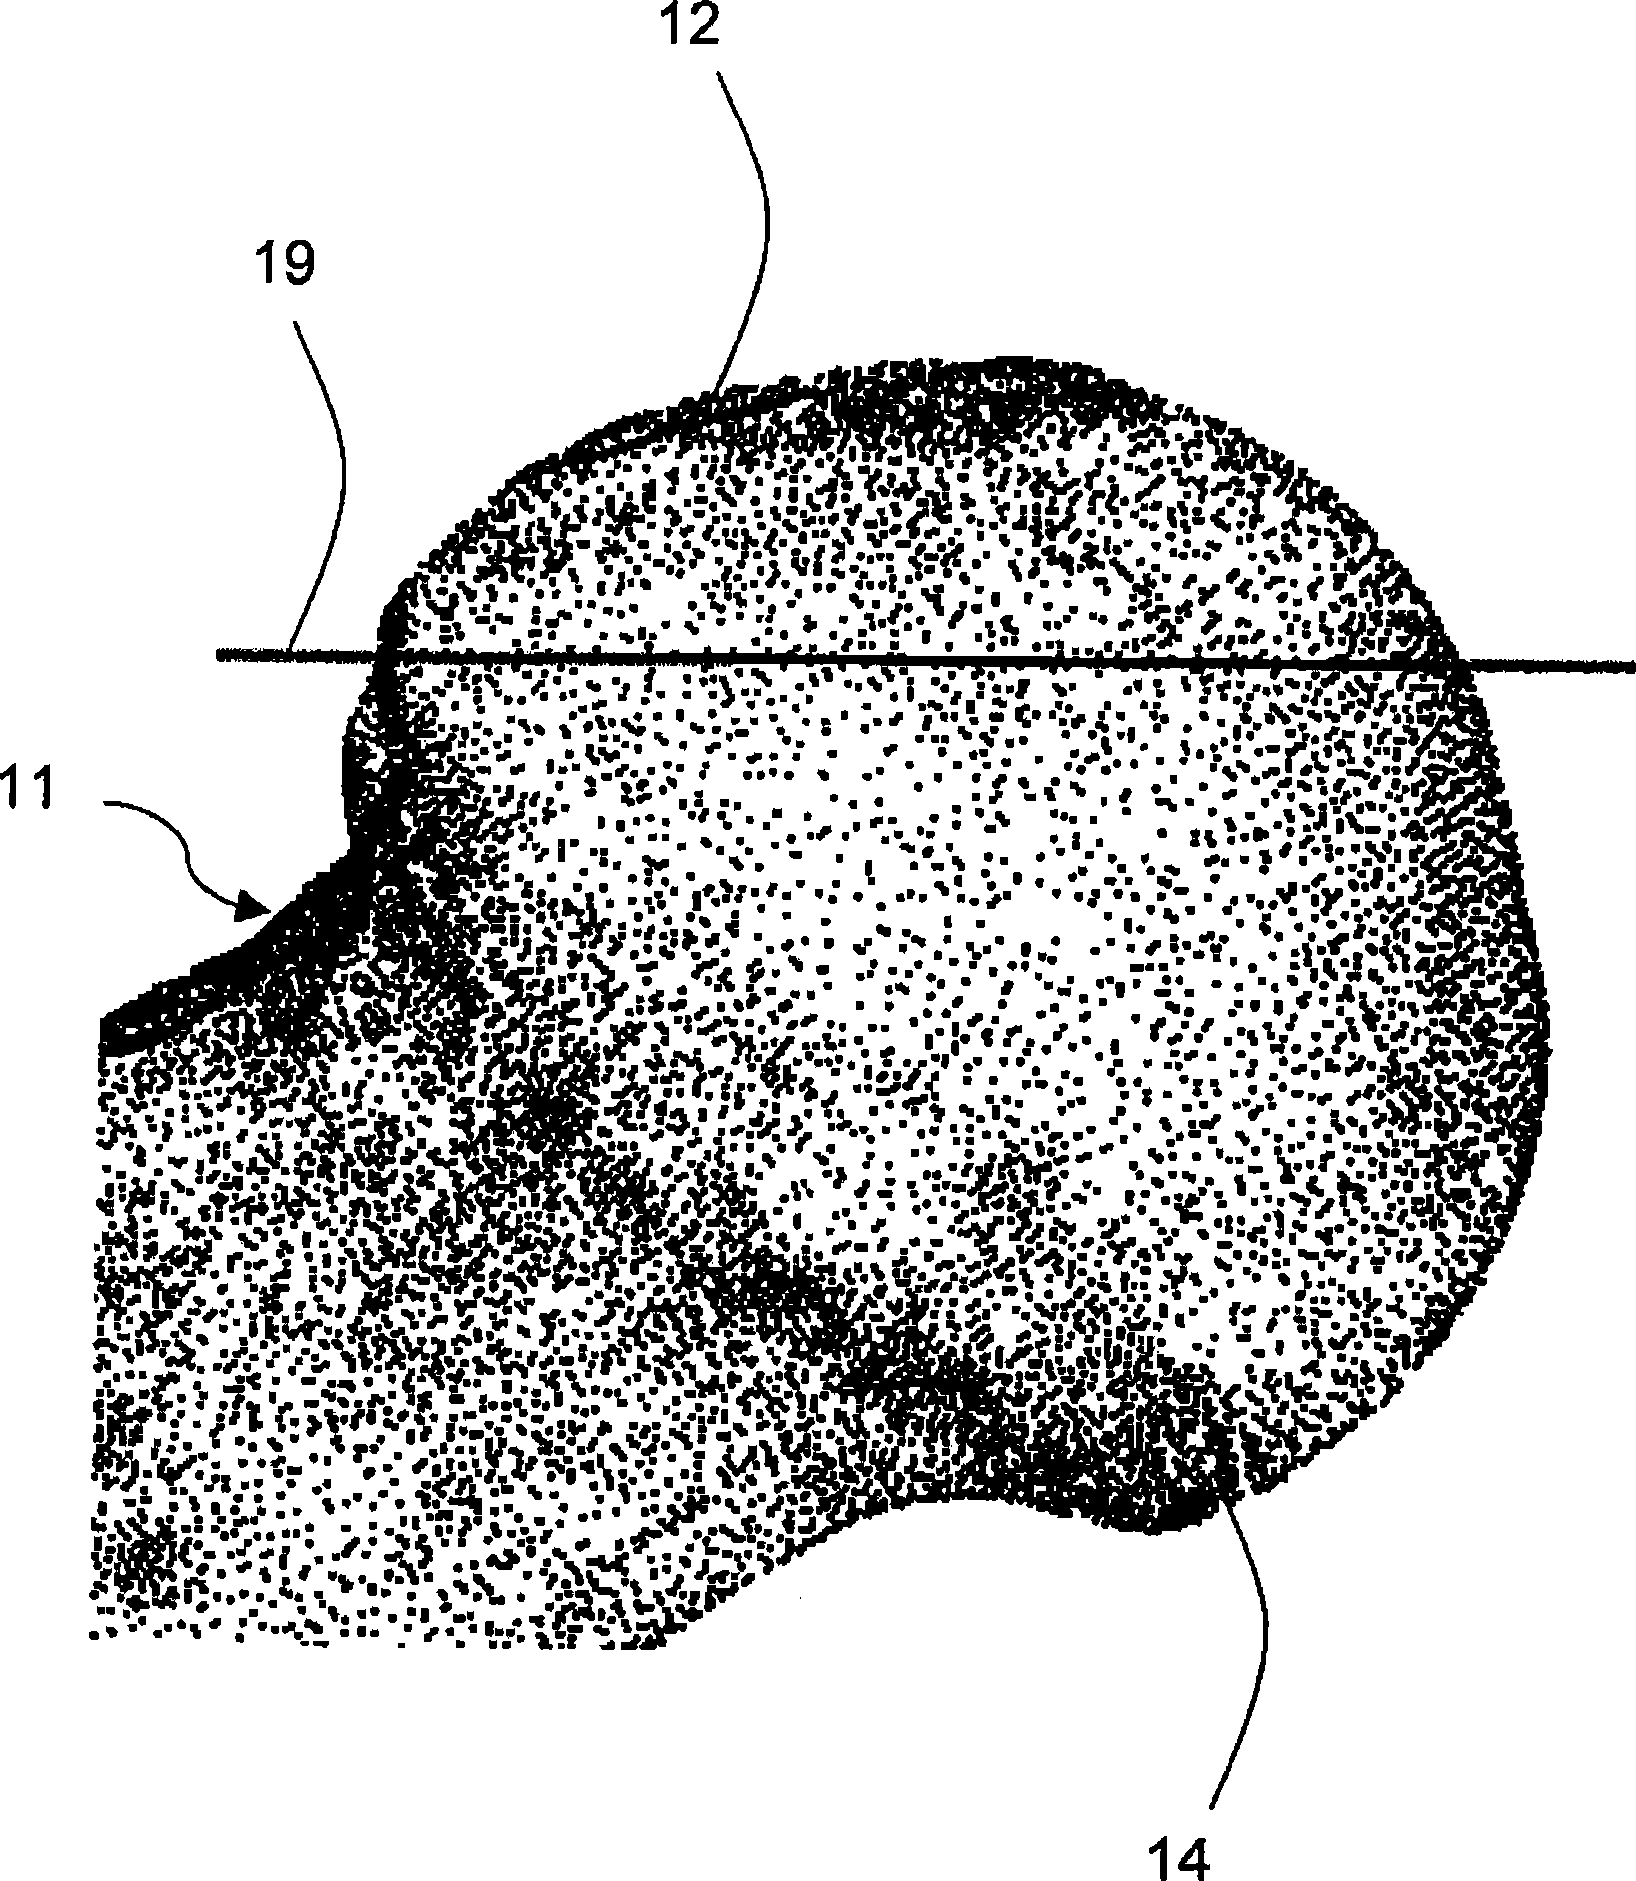 Digital data design method of local joint surface implant